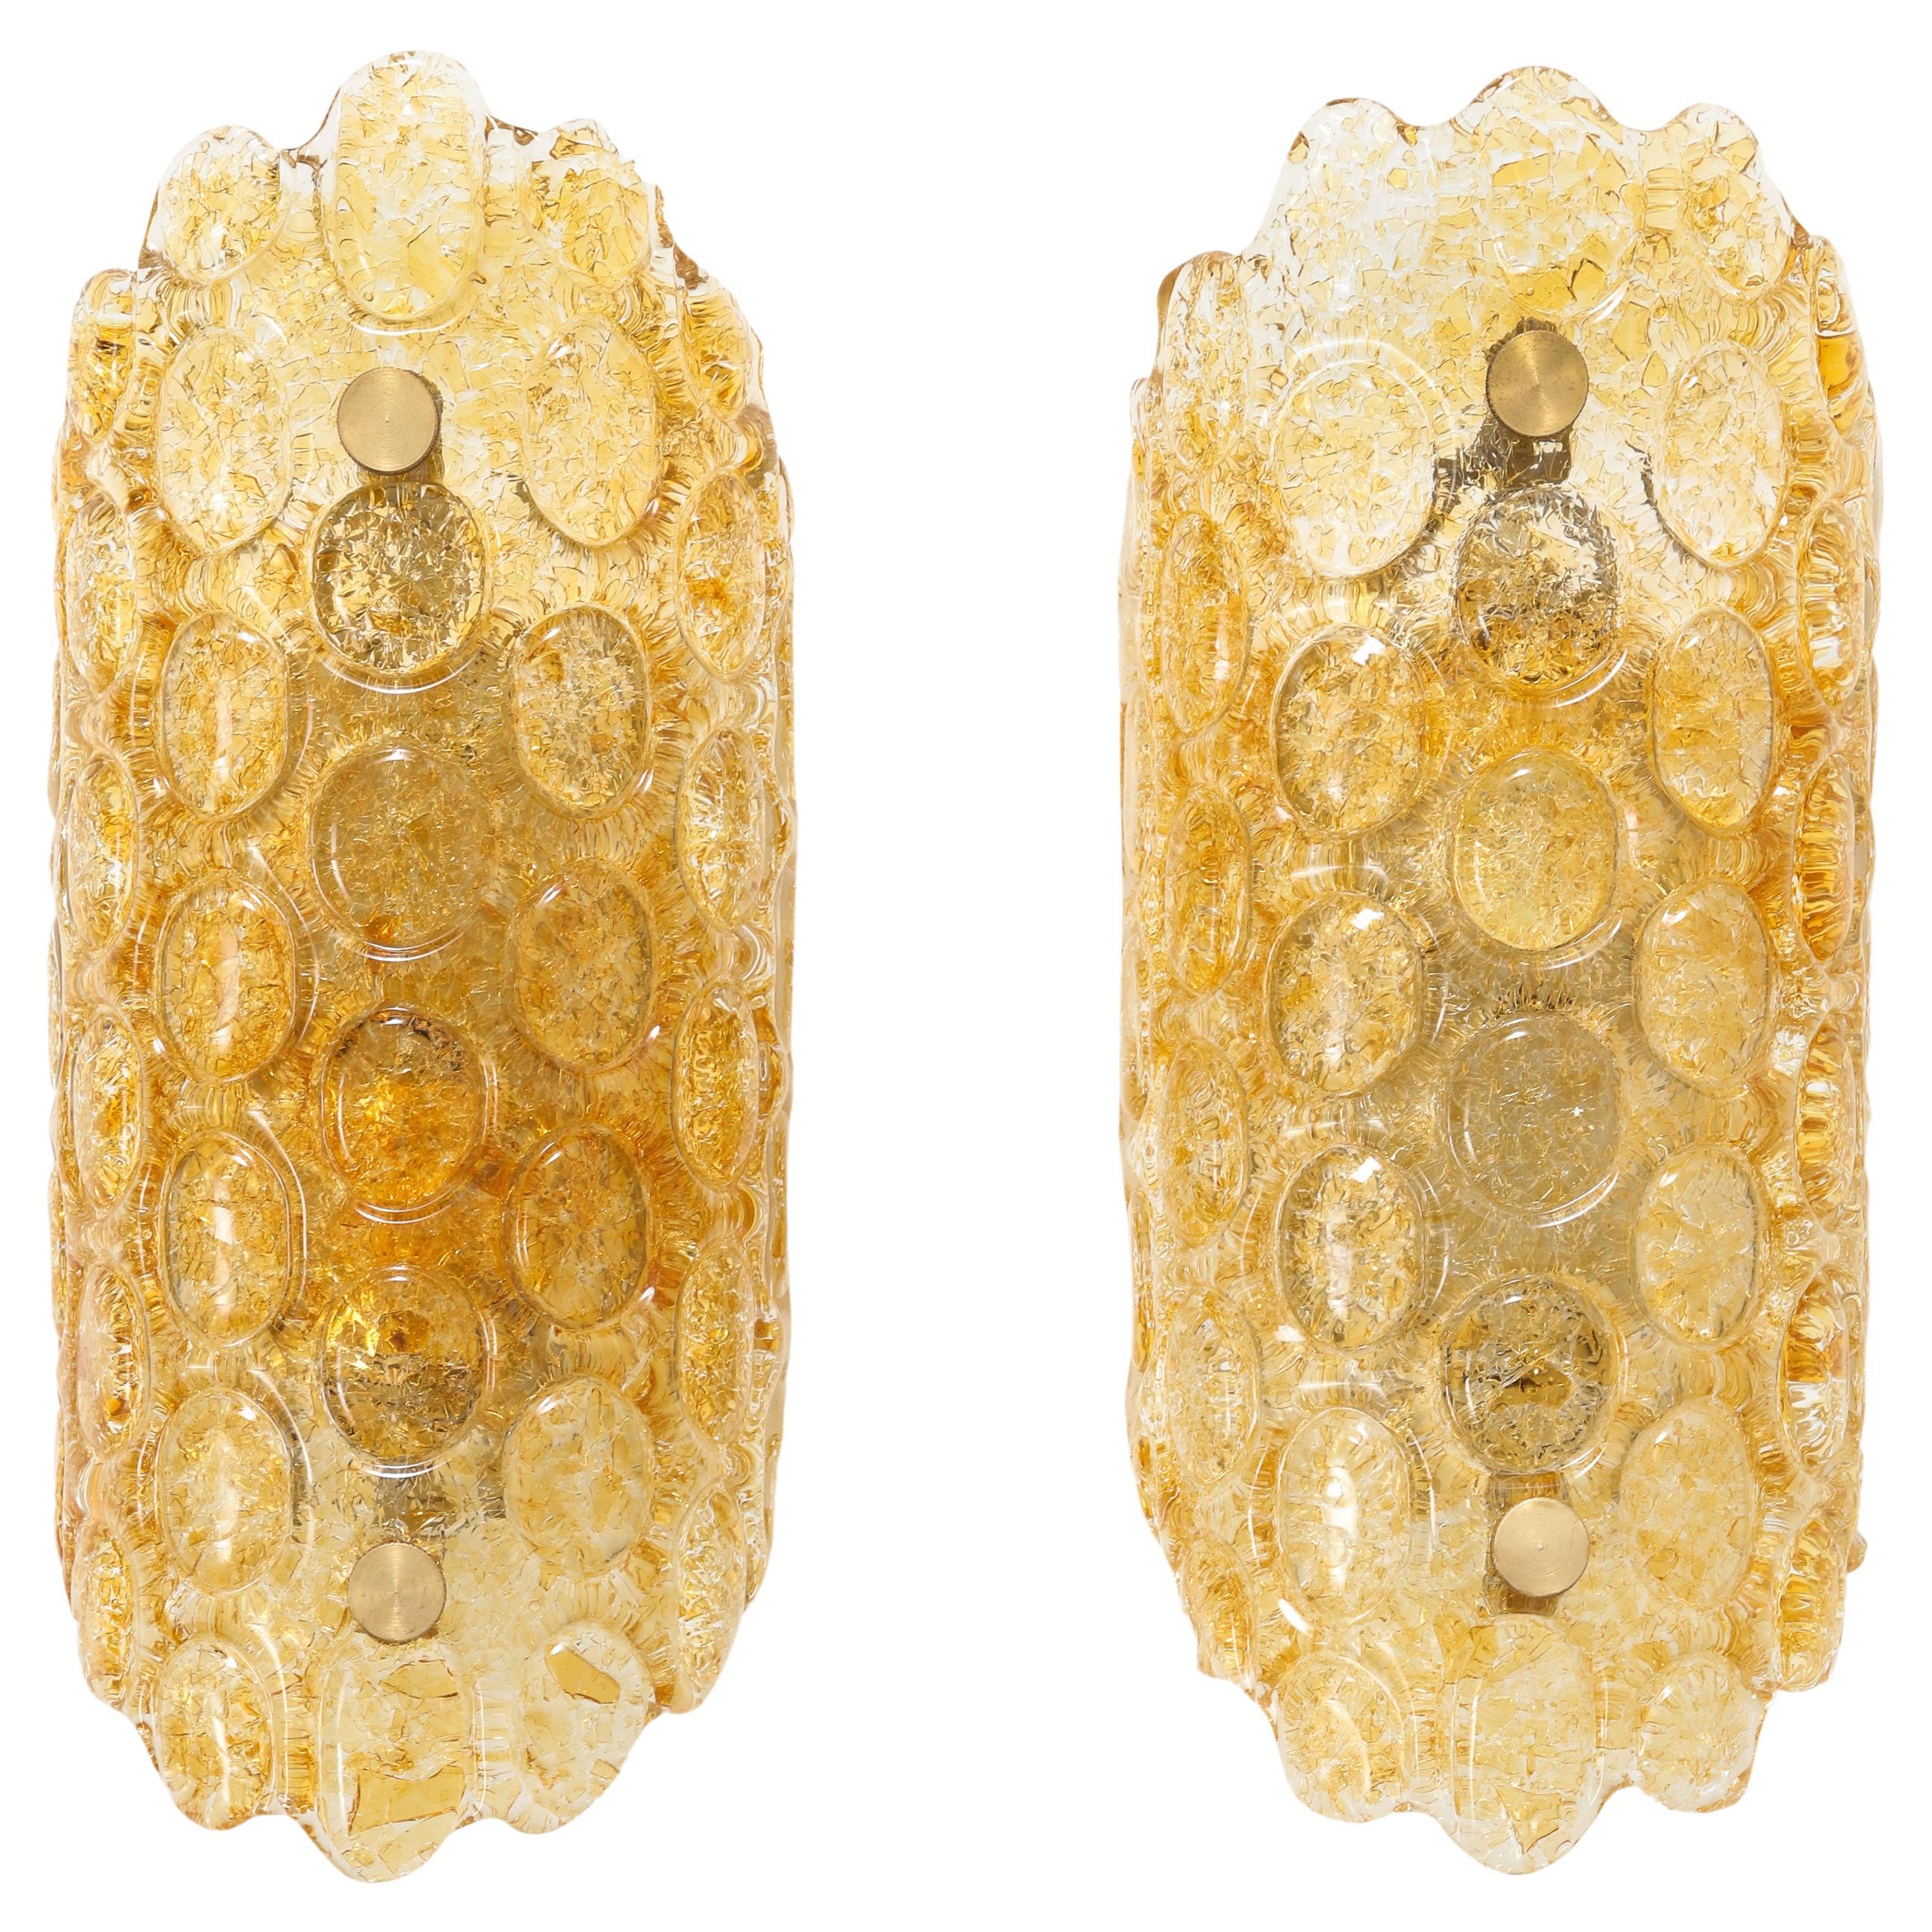 Pair of 1960's Textured Disc Glass Sconces in the style of Orrefors.